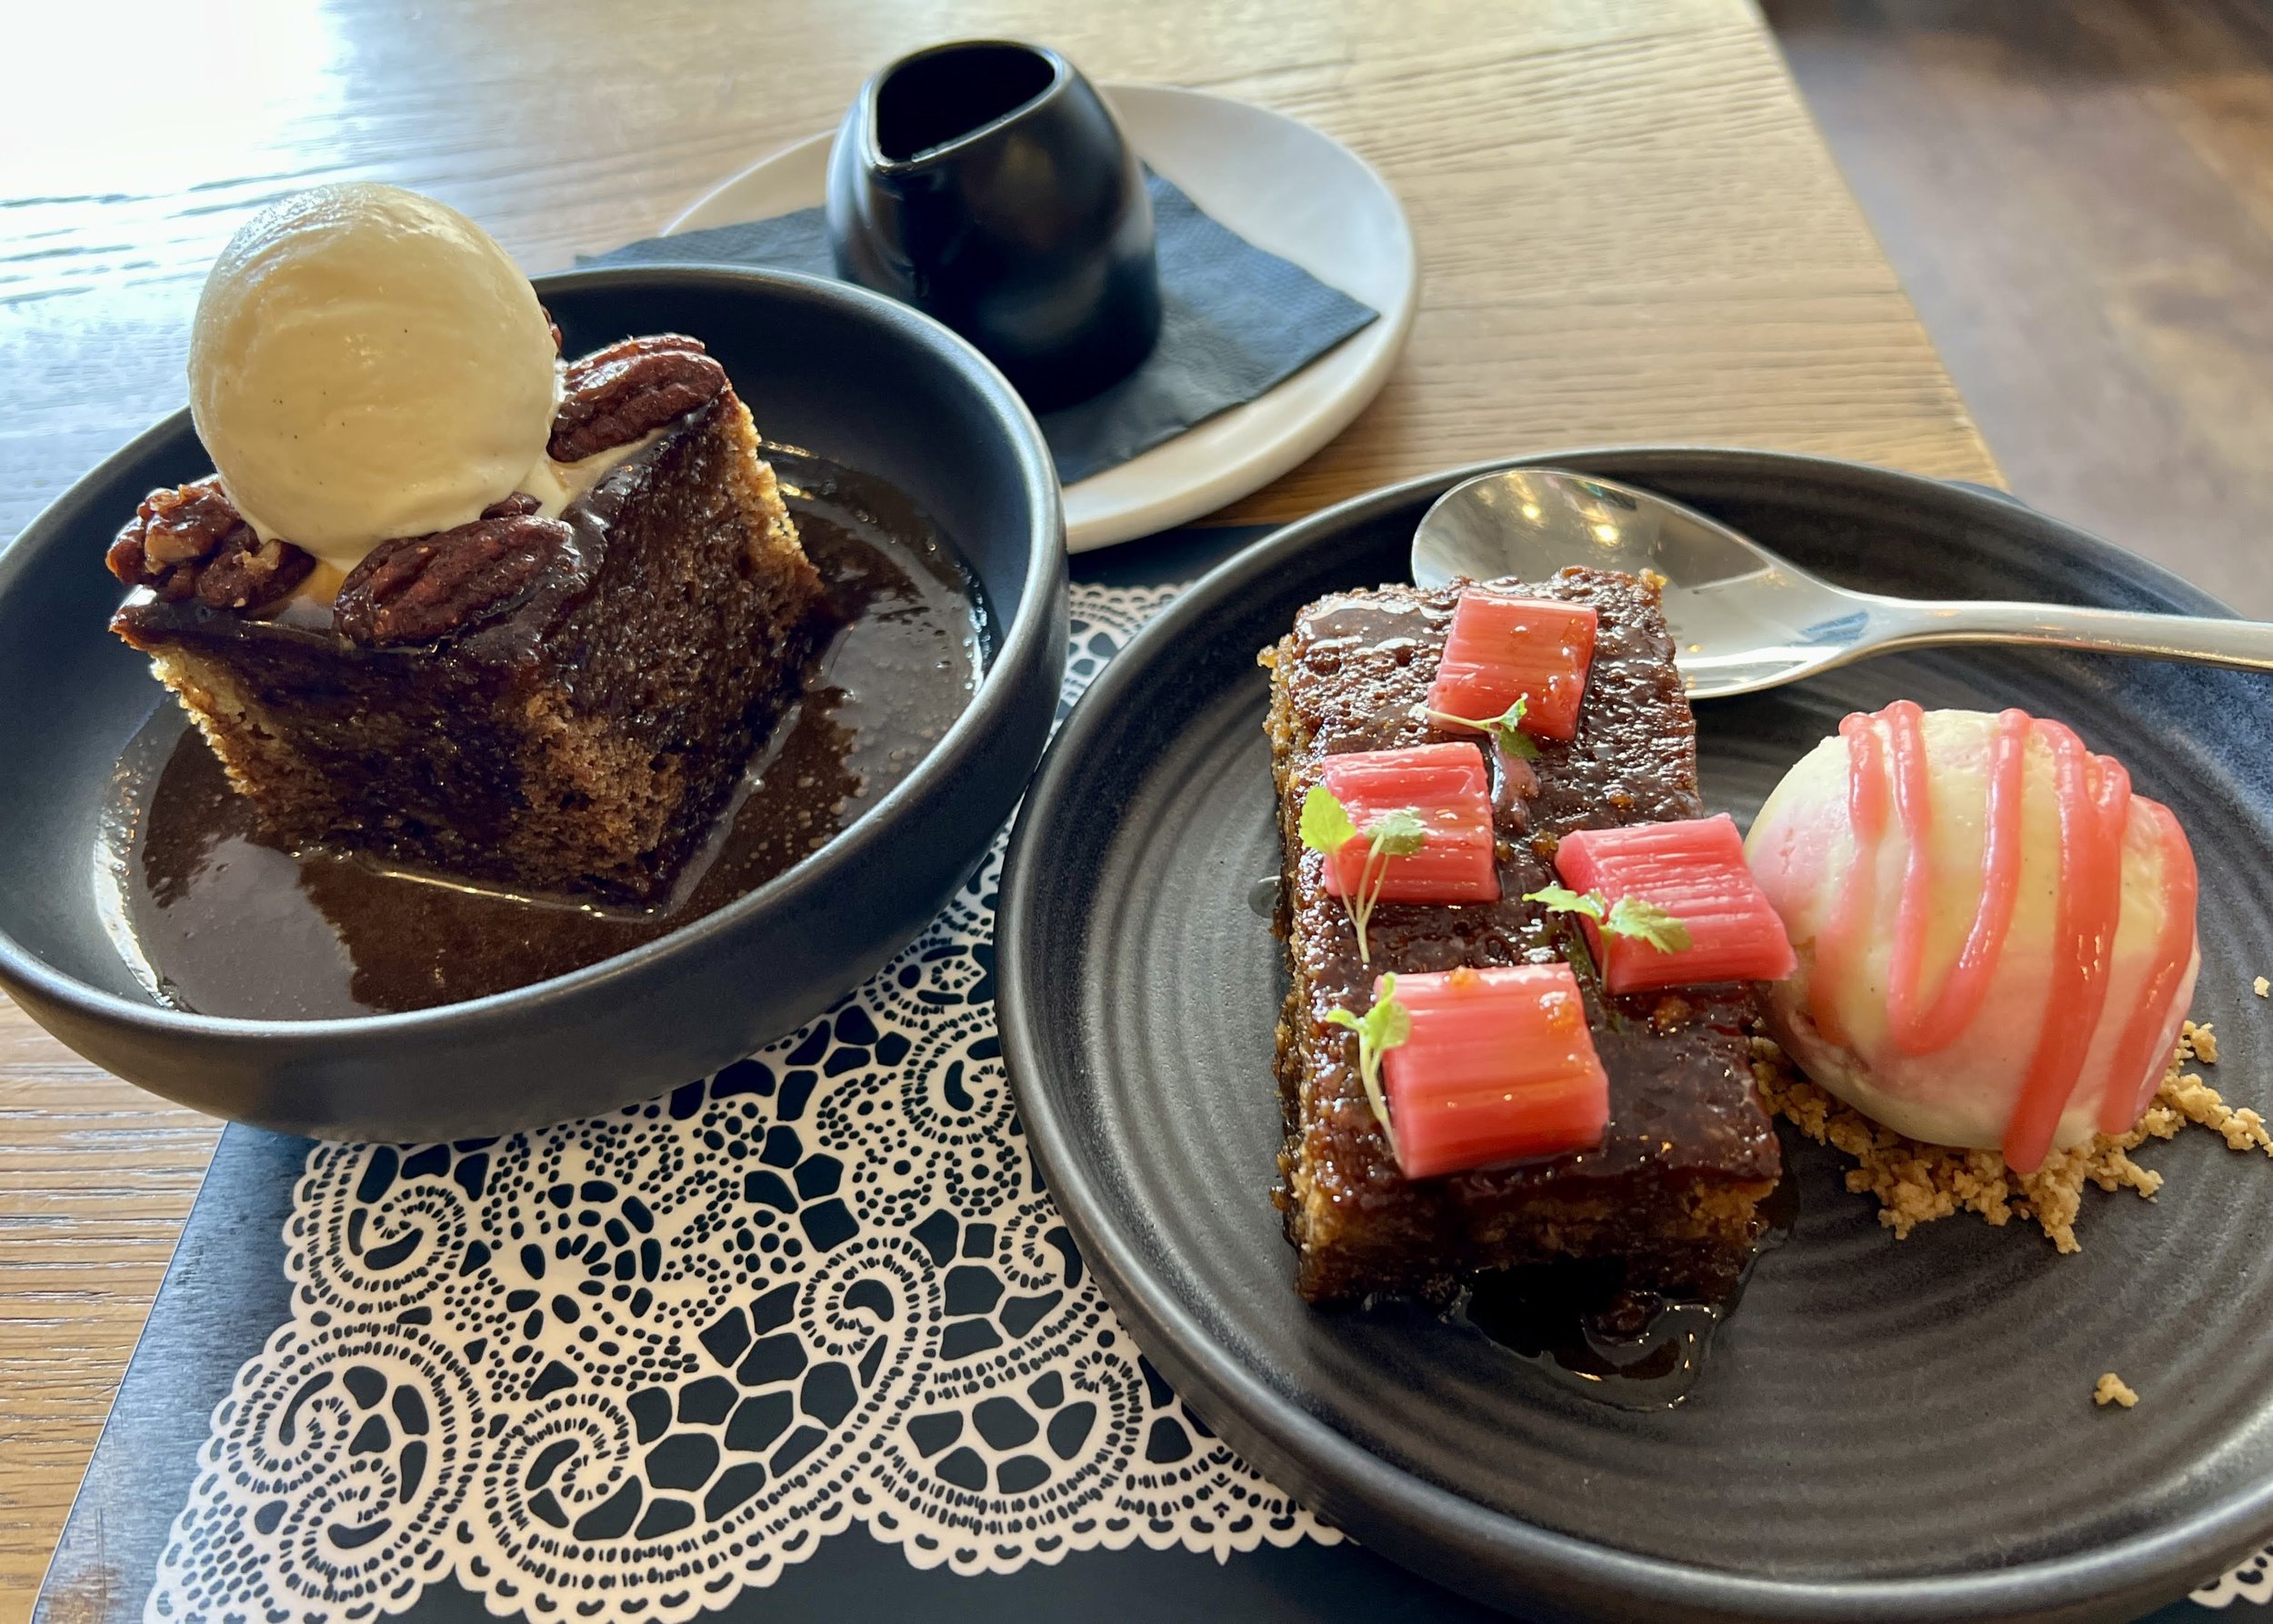  Sticky Toffee Pudding and Ginger Parkin at the Scran &amp; Scallie 